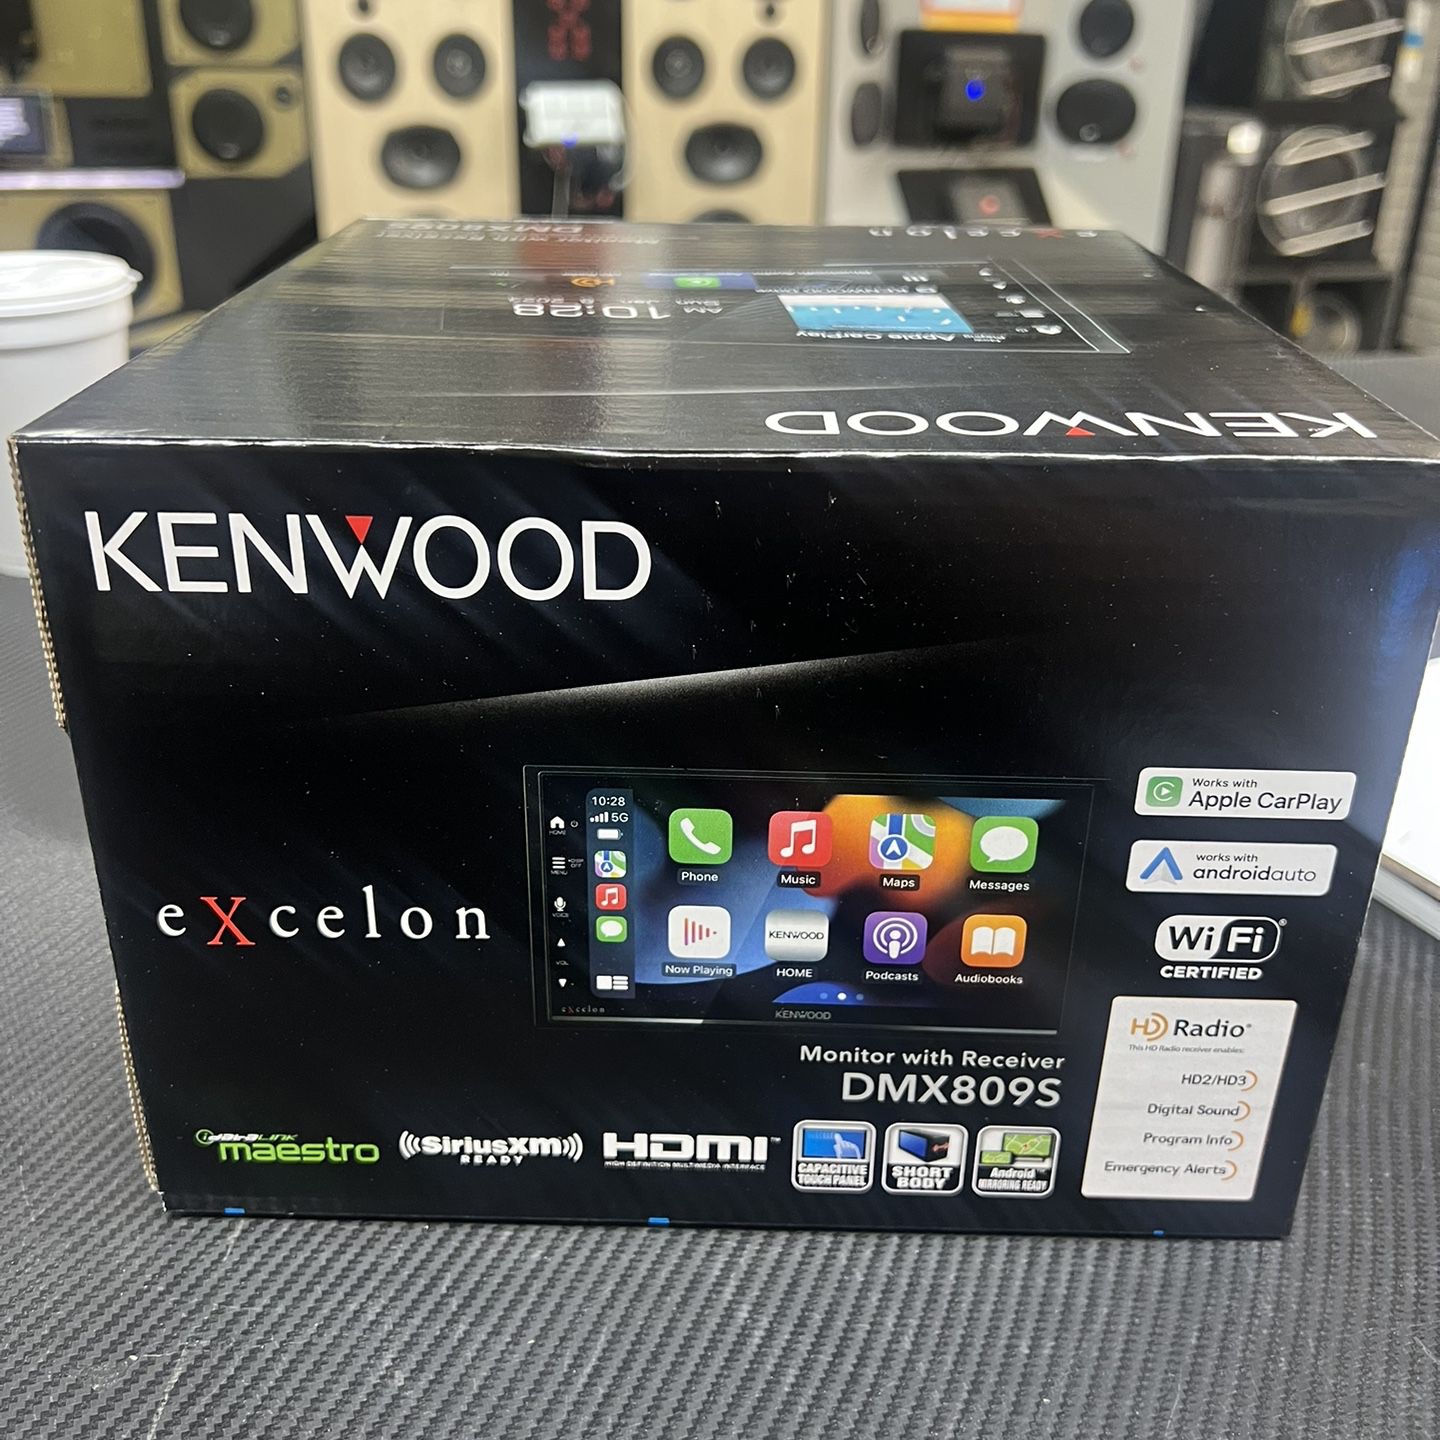 Exclusive finance offer for the Kenwood Exelon top-of-the-line product, available for a limited time with a hundred-day financing option requiring no 